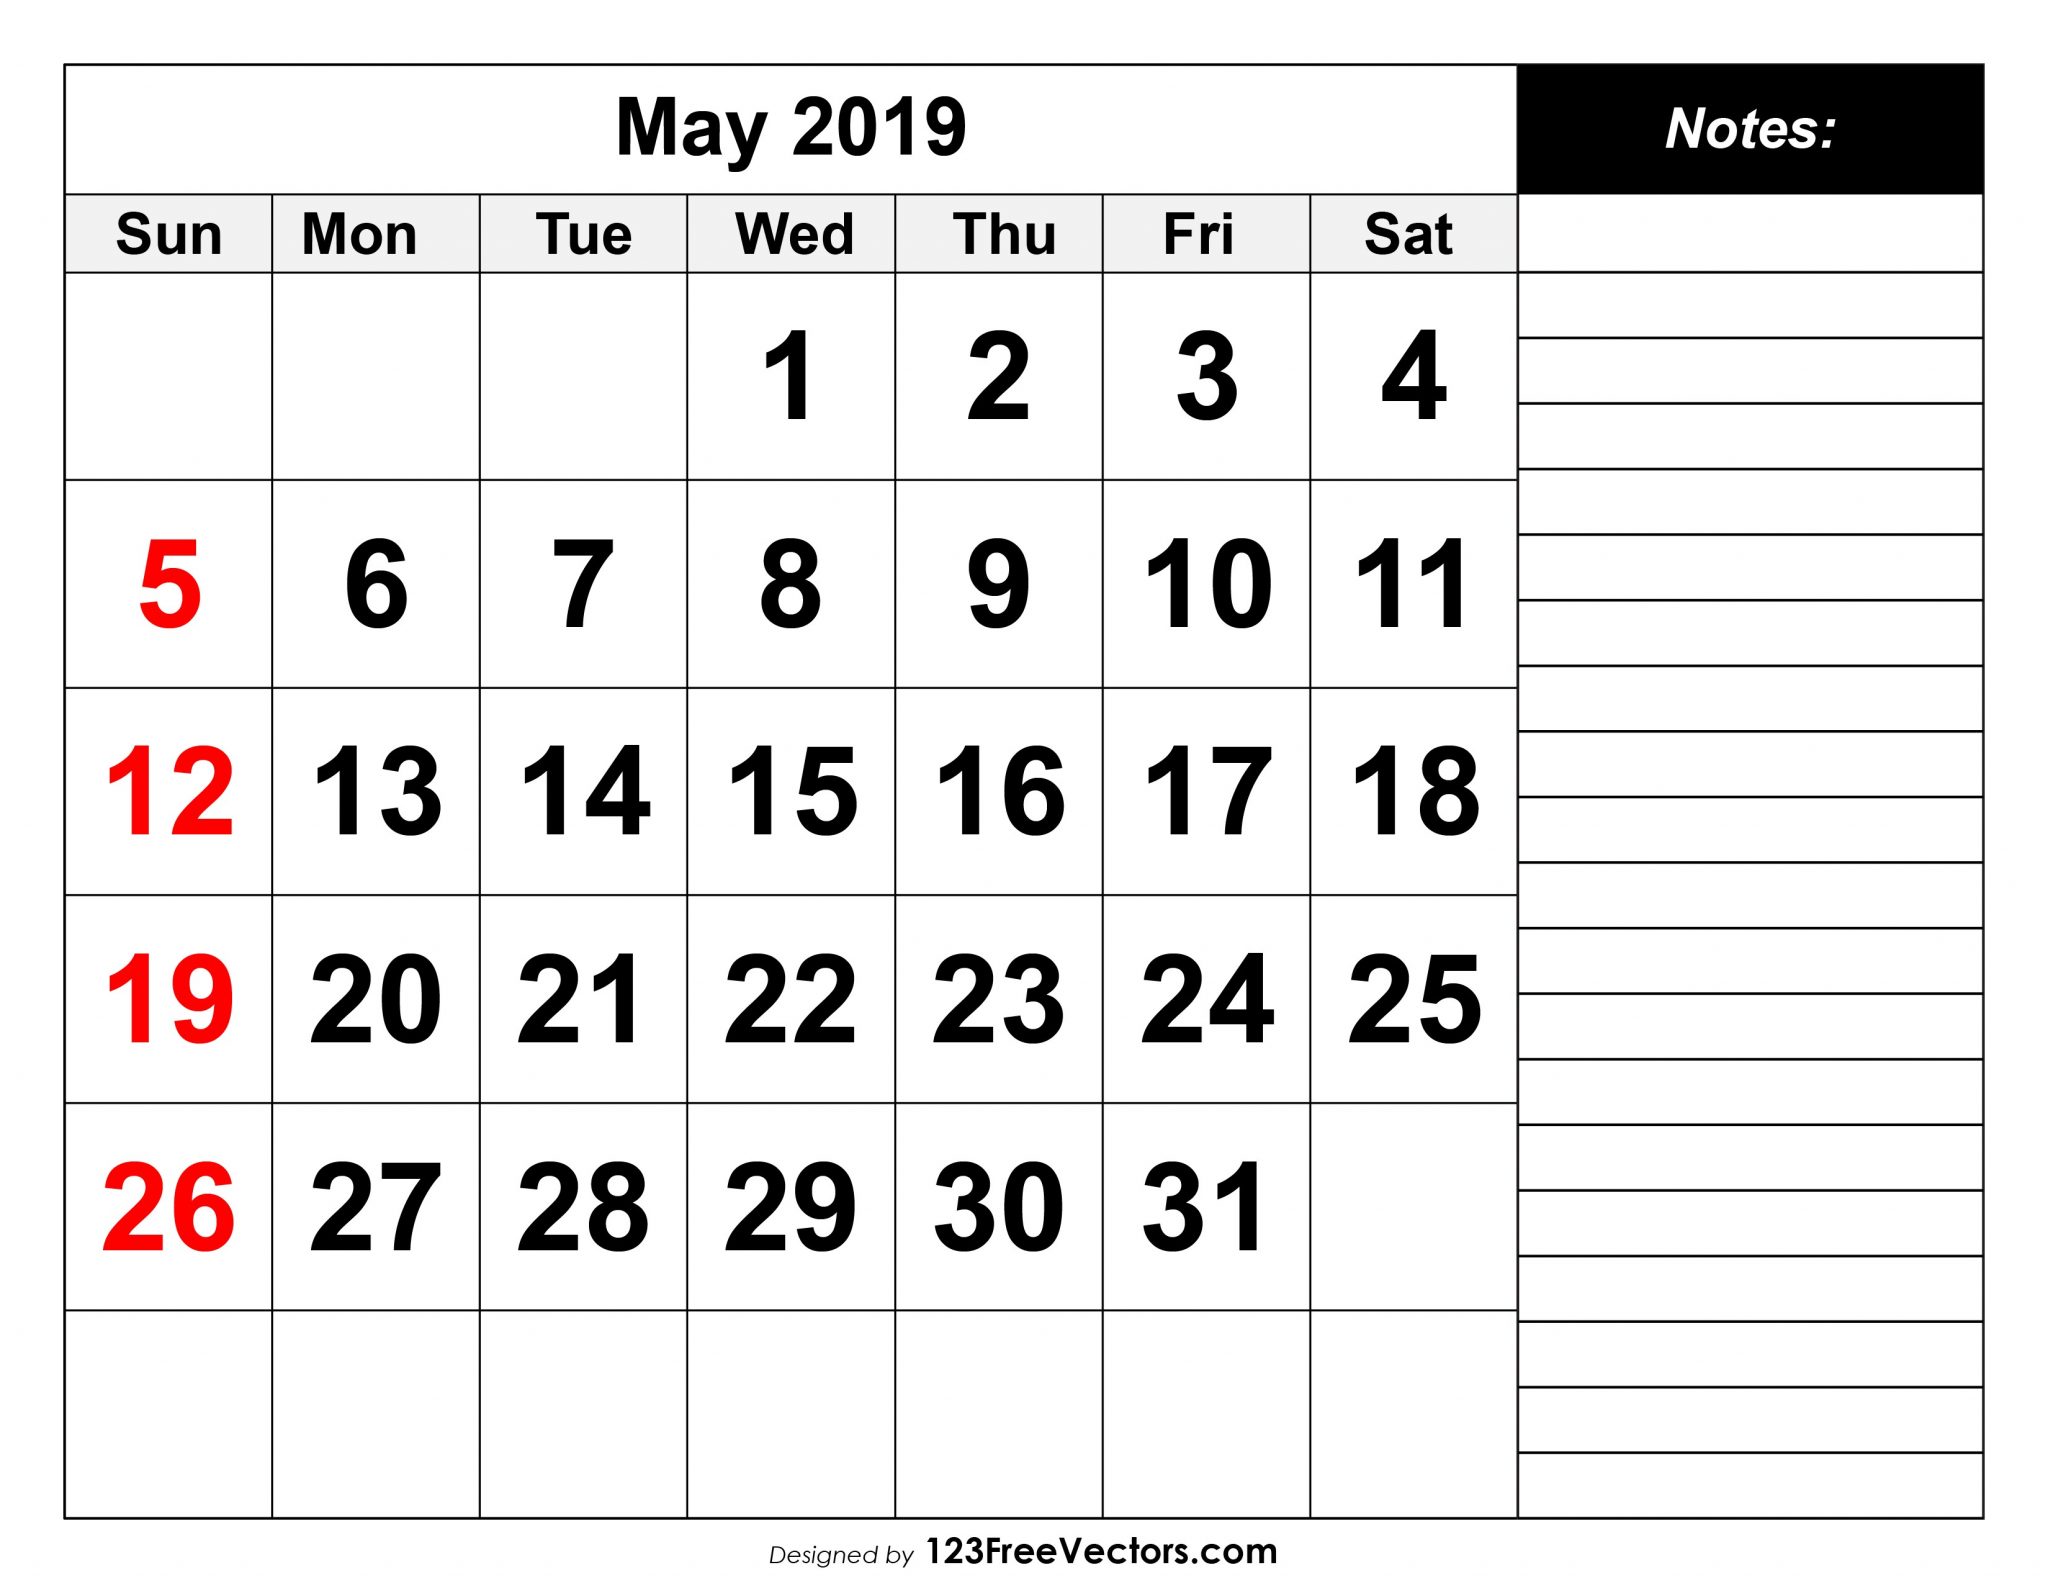 Printable May 2019 Calendar With Notes